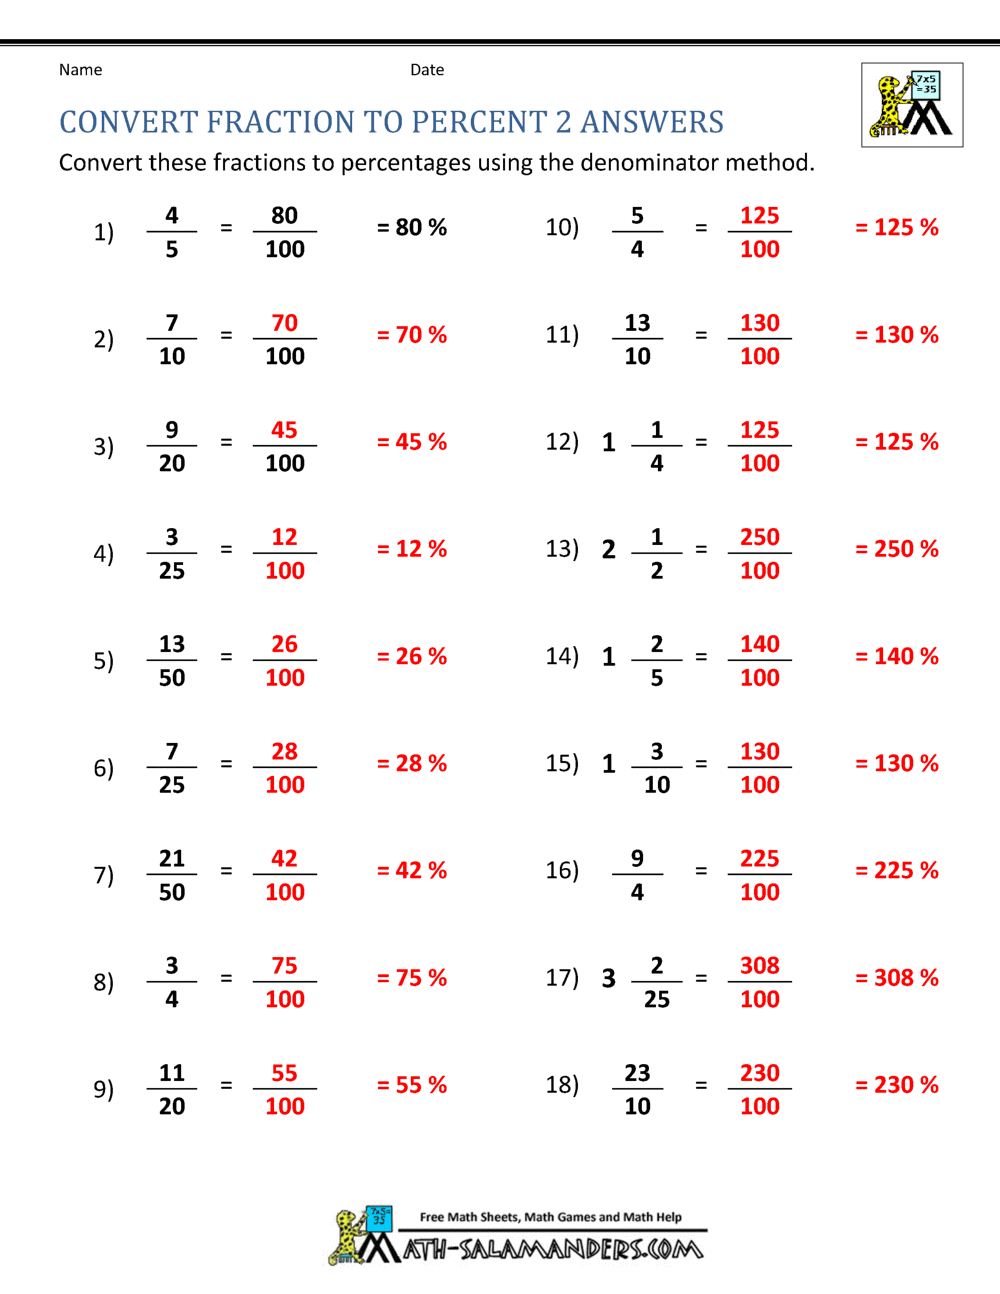 Convert Fraction to Percent